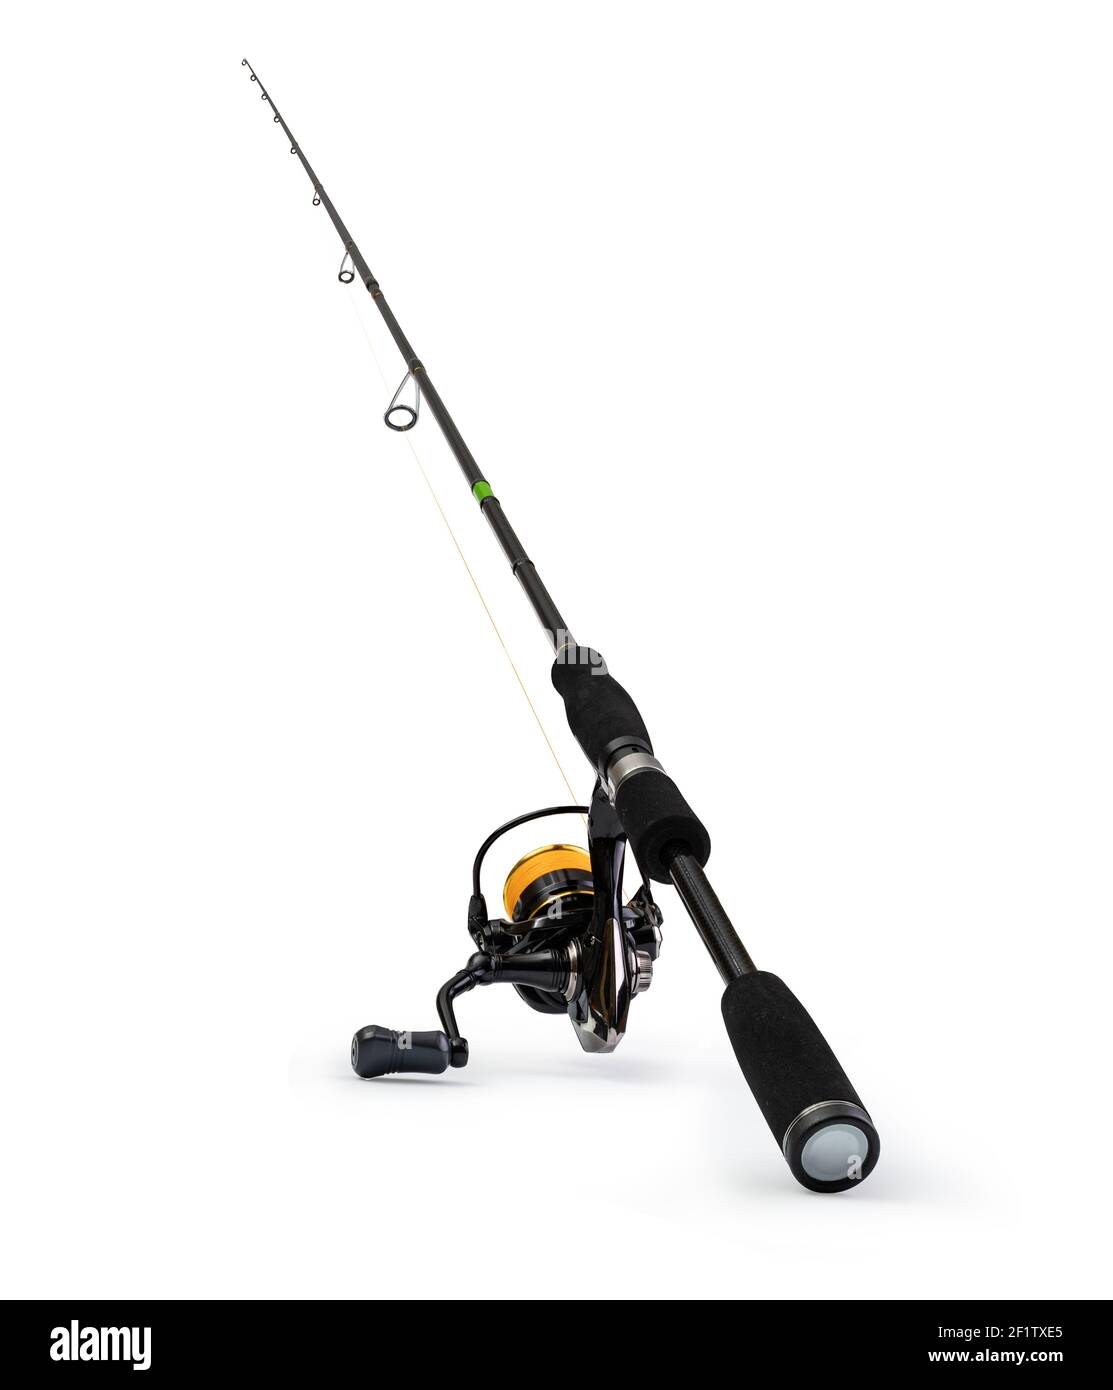 Spinning rod for fishing Stock Photo